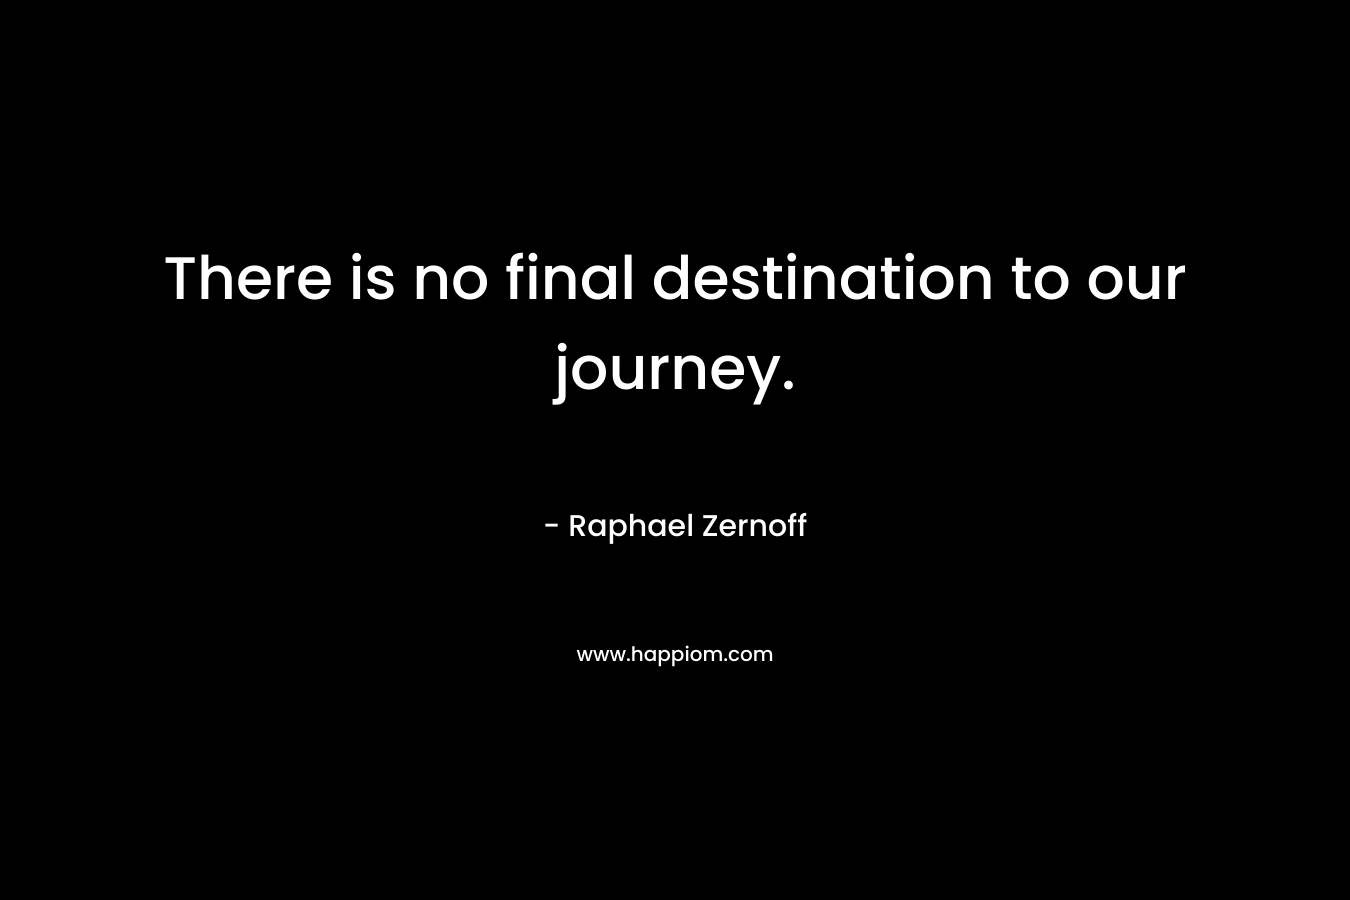 There is no final destination to our journey. – Raphael Zernoff